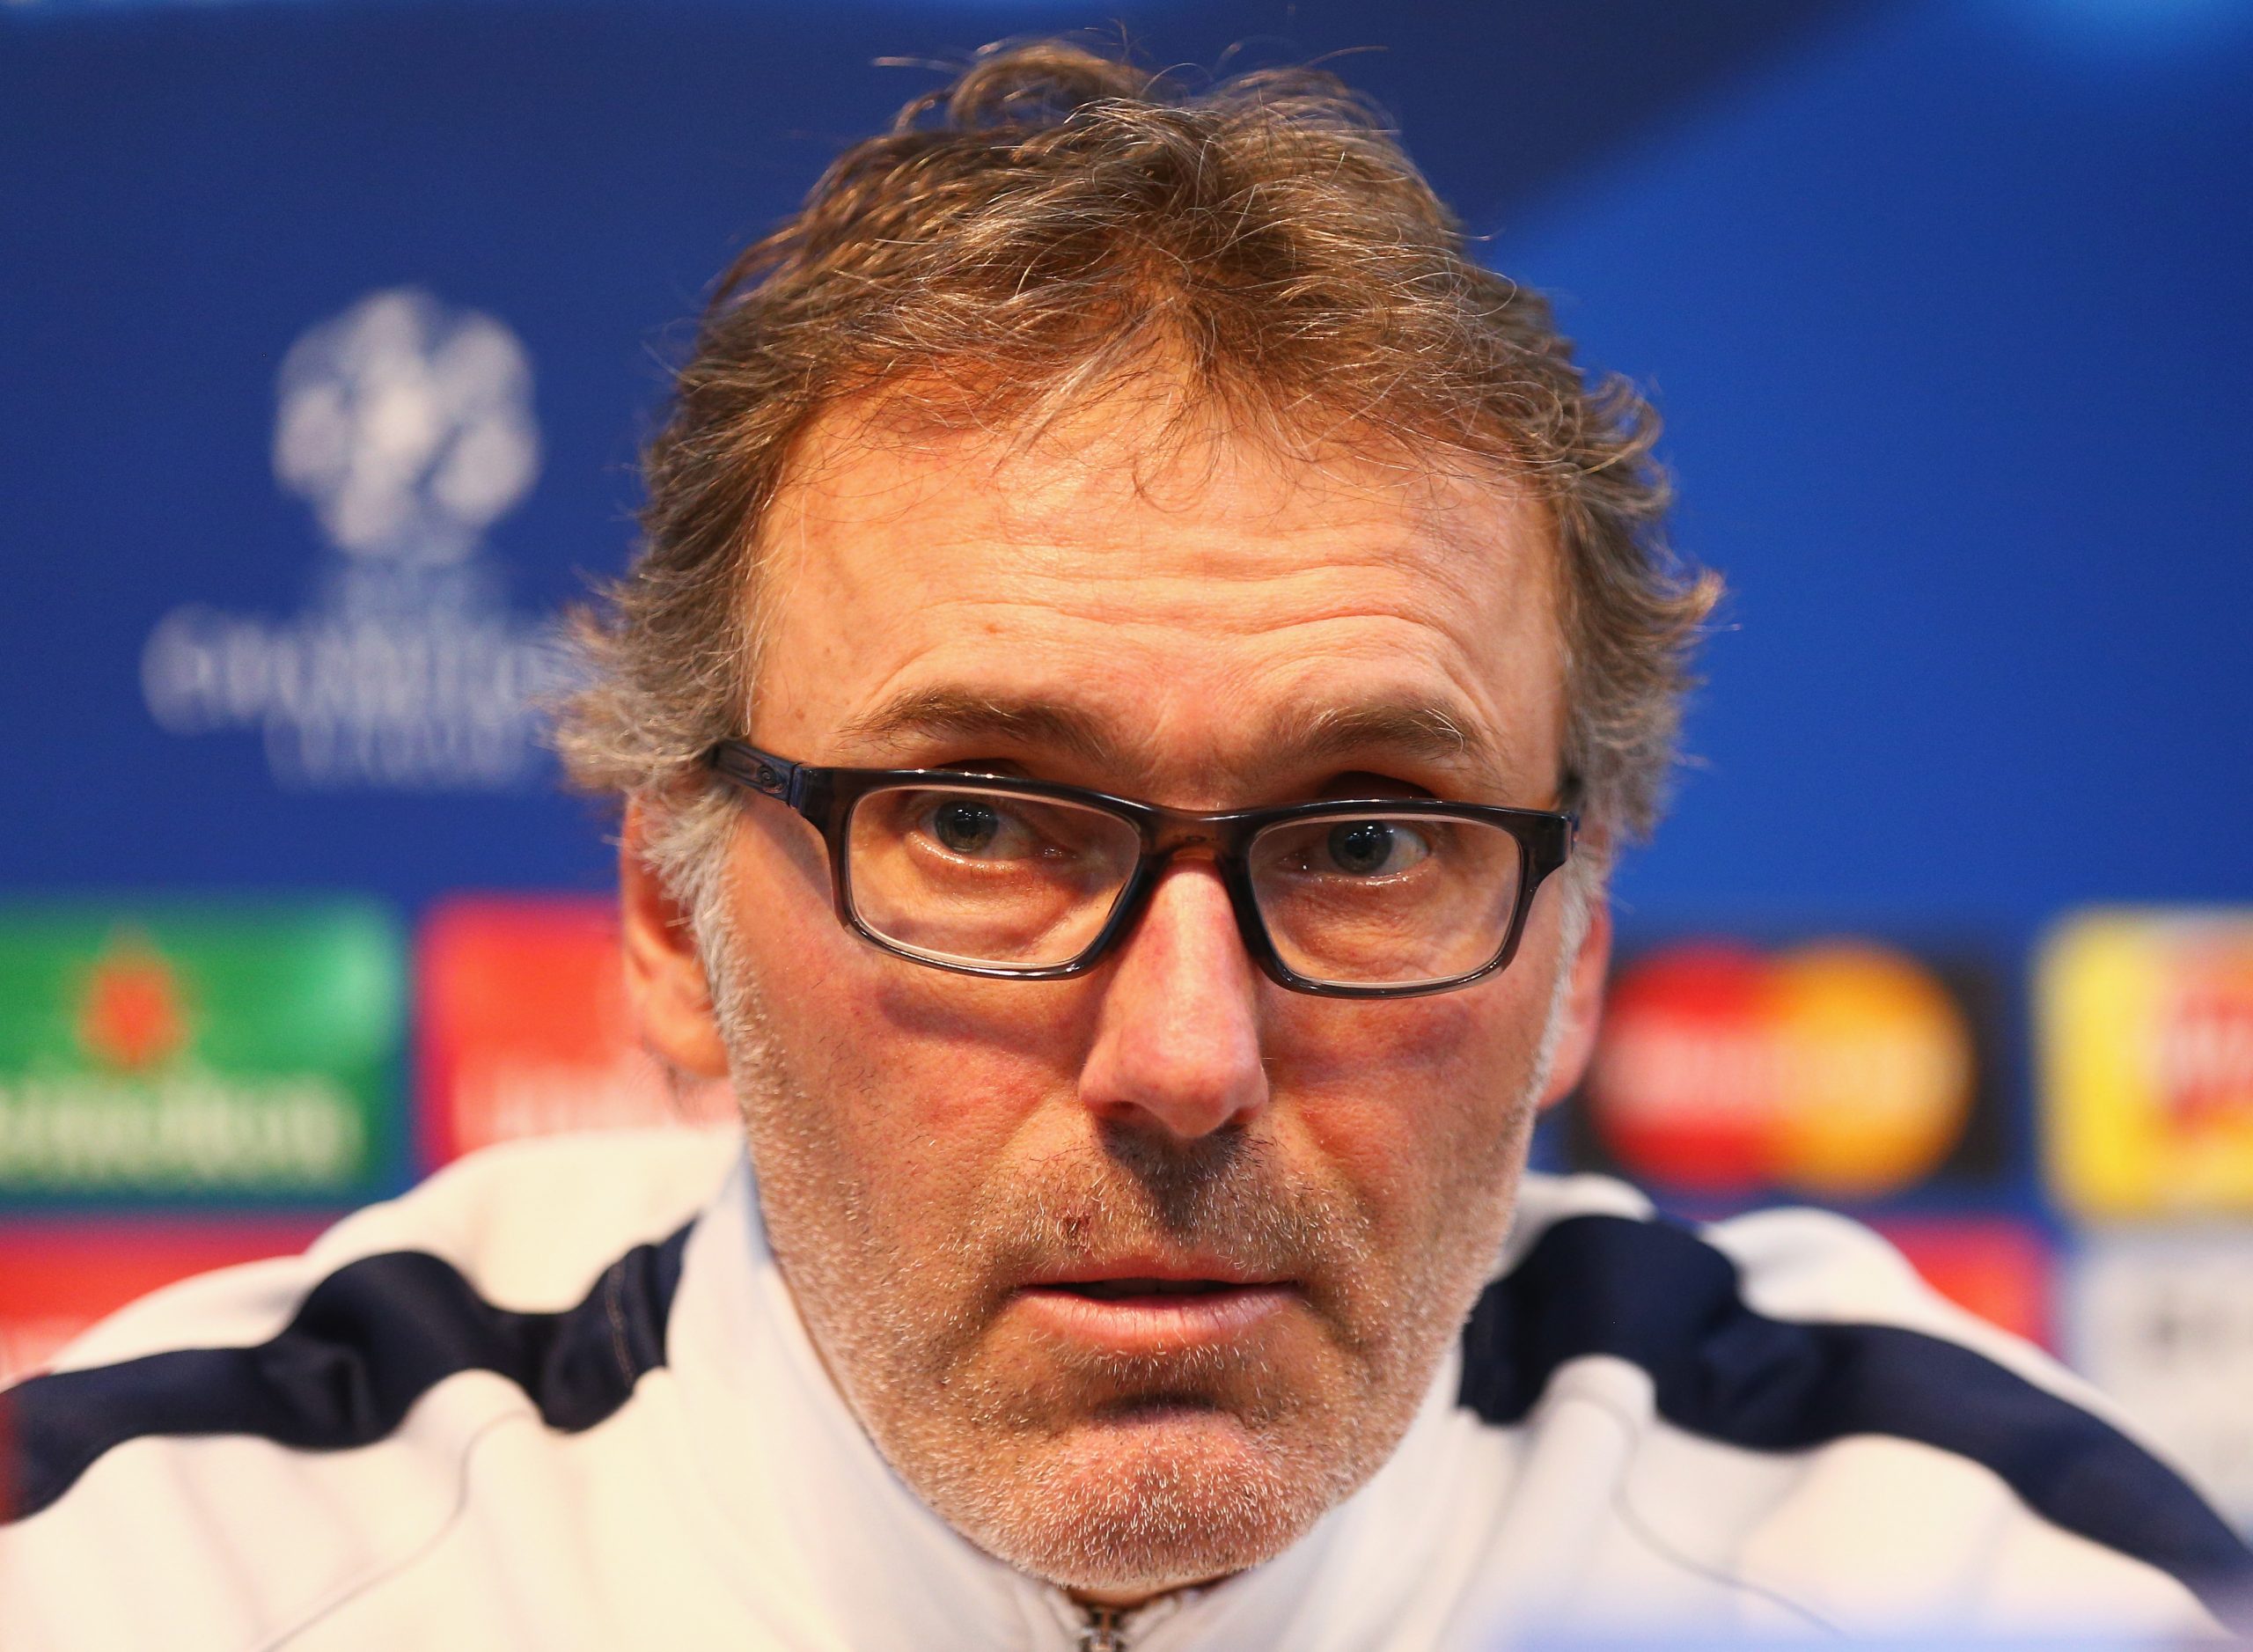 Laurent Blanc is leading the race to be appointed Manchester United interim manager.